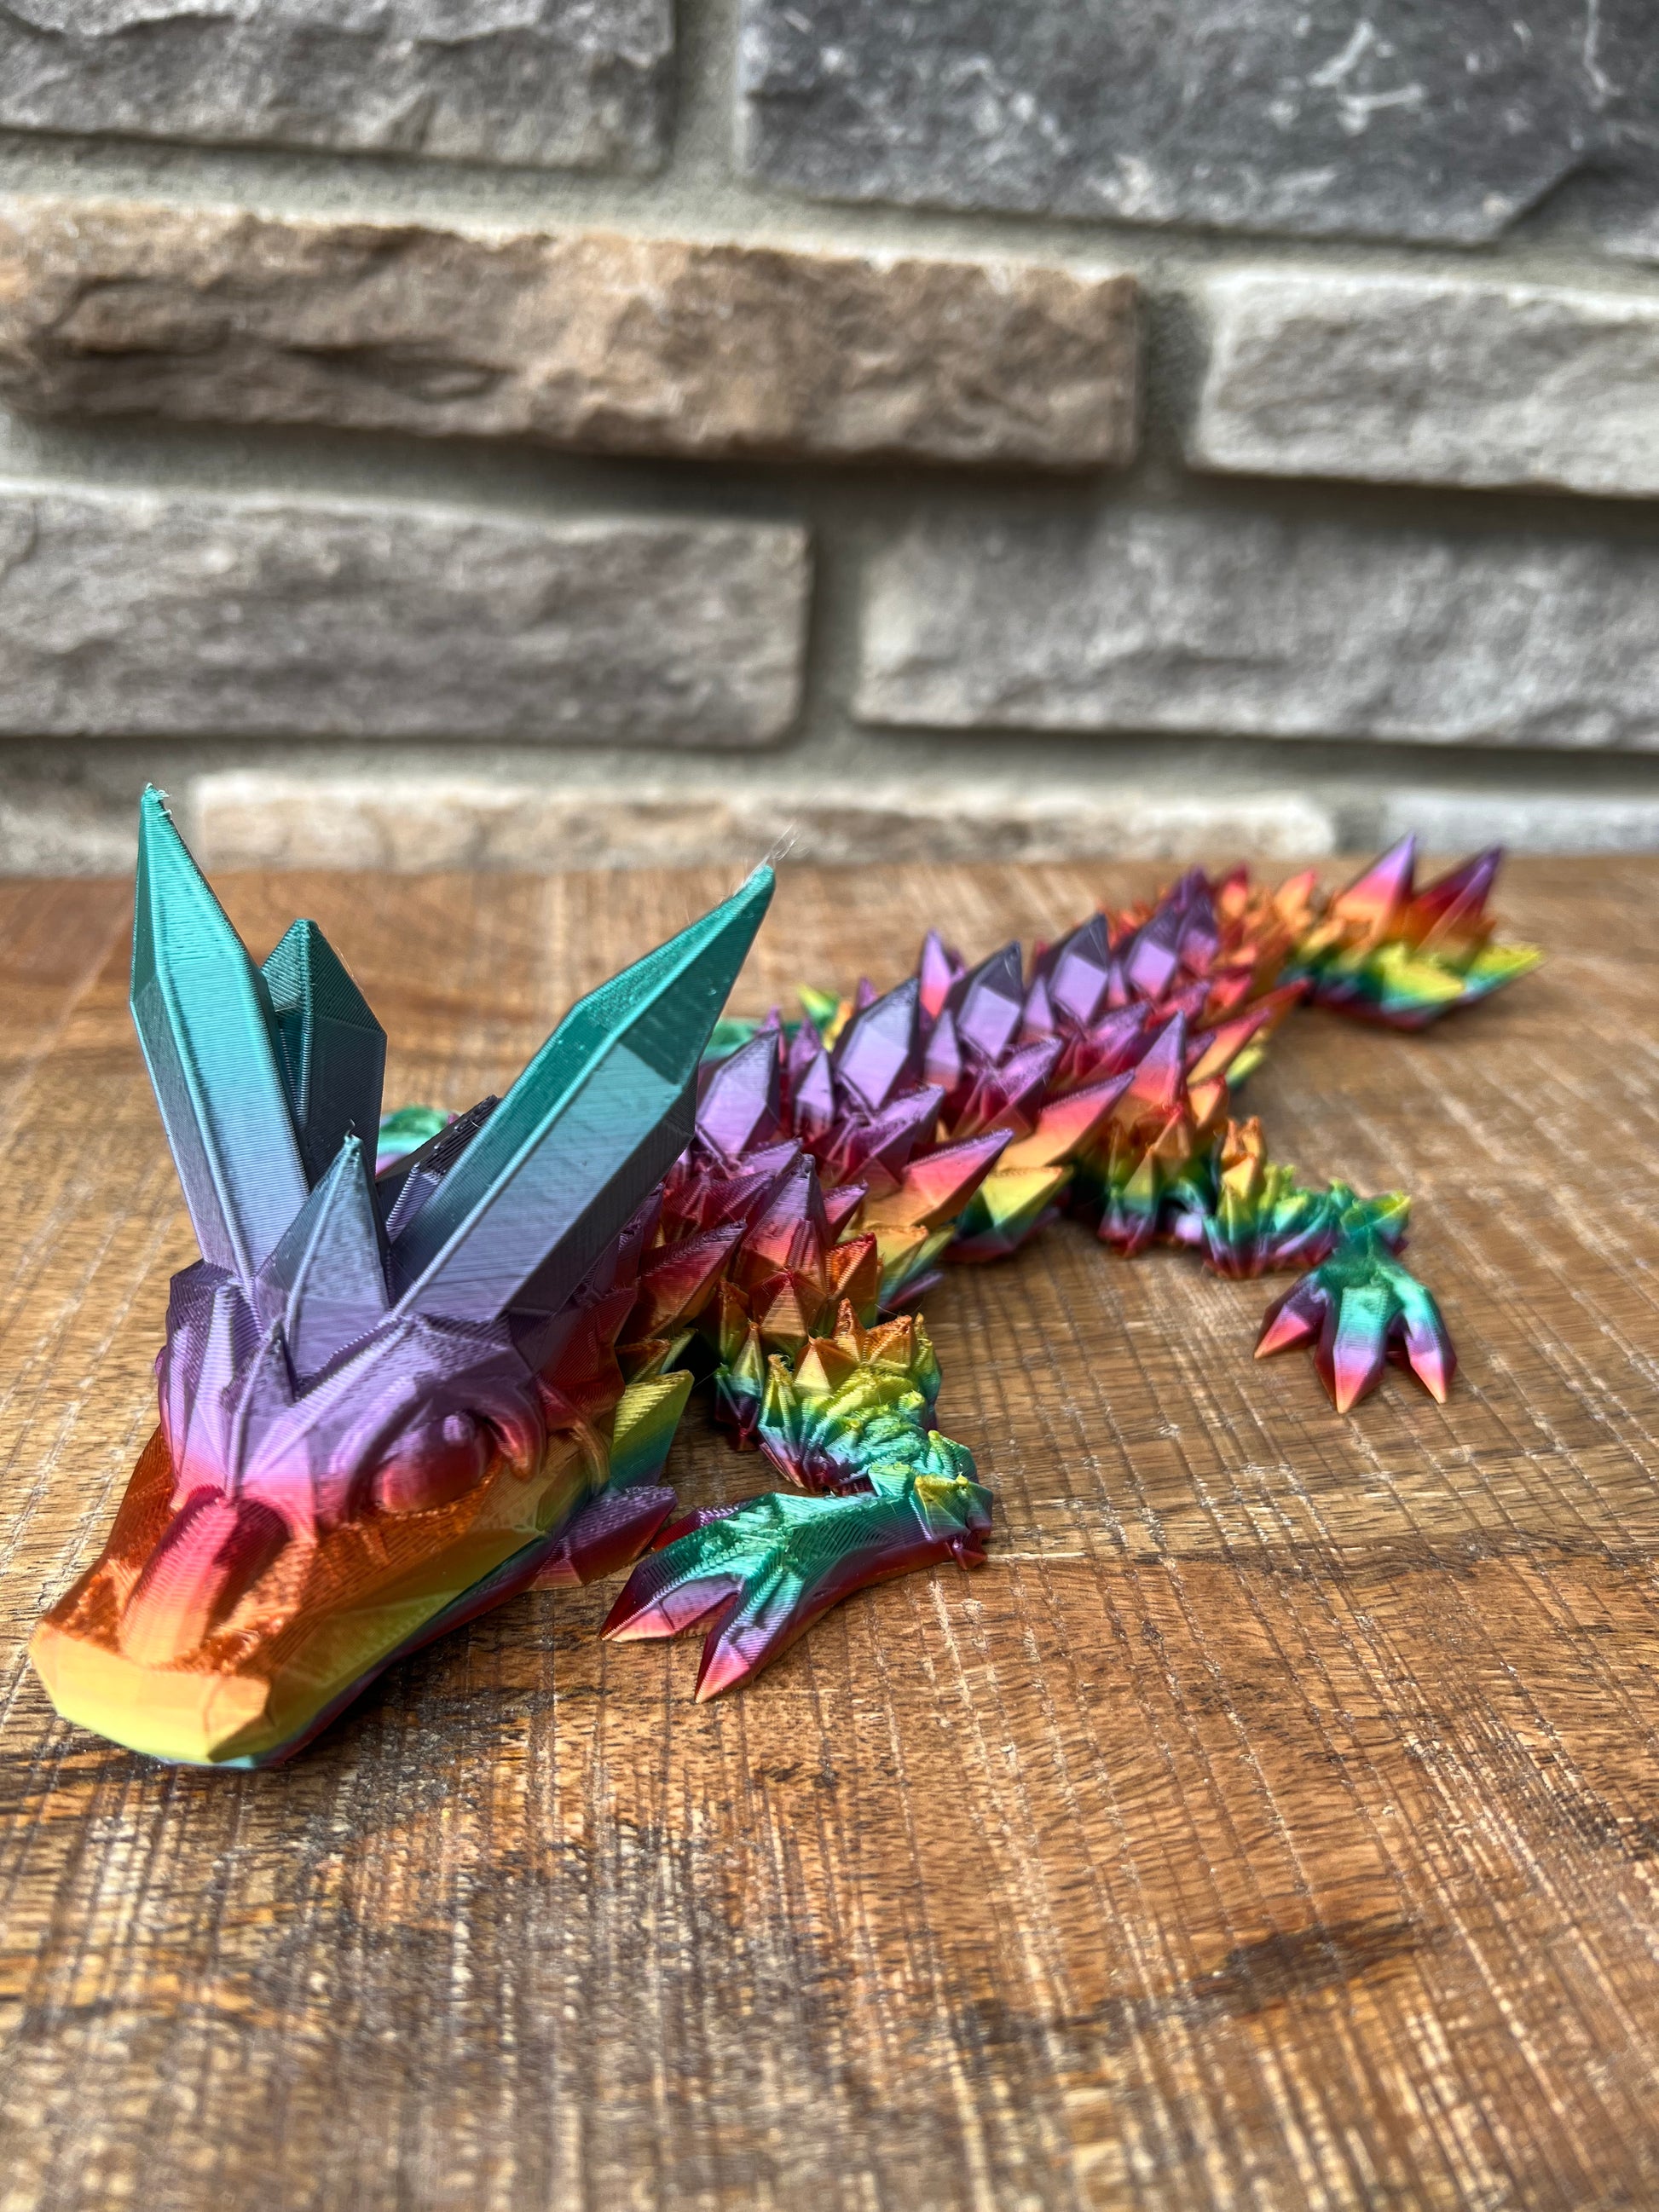 3d Printed Articulated Crystal Dragon Toy (24, Gold/Silver)